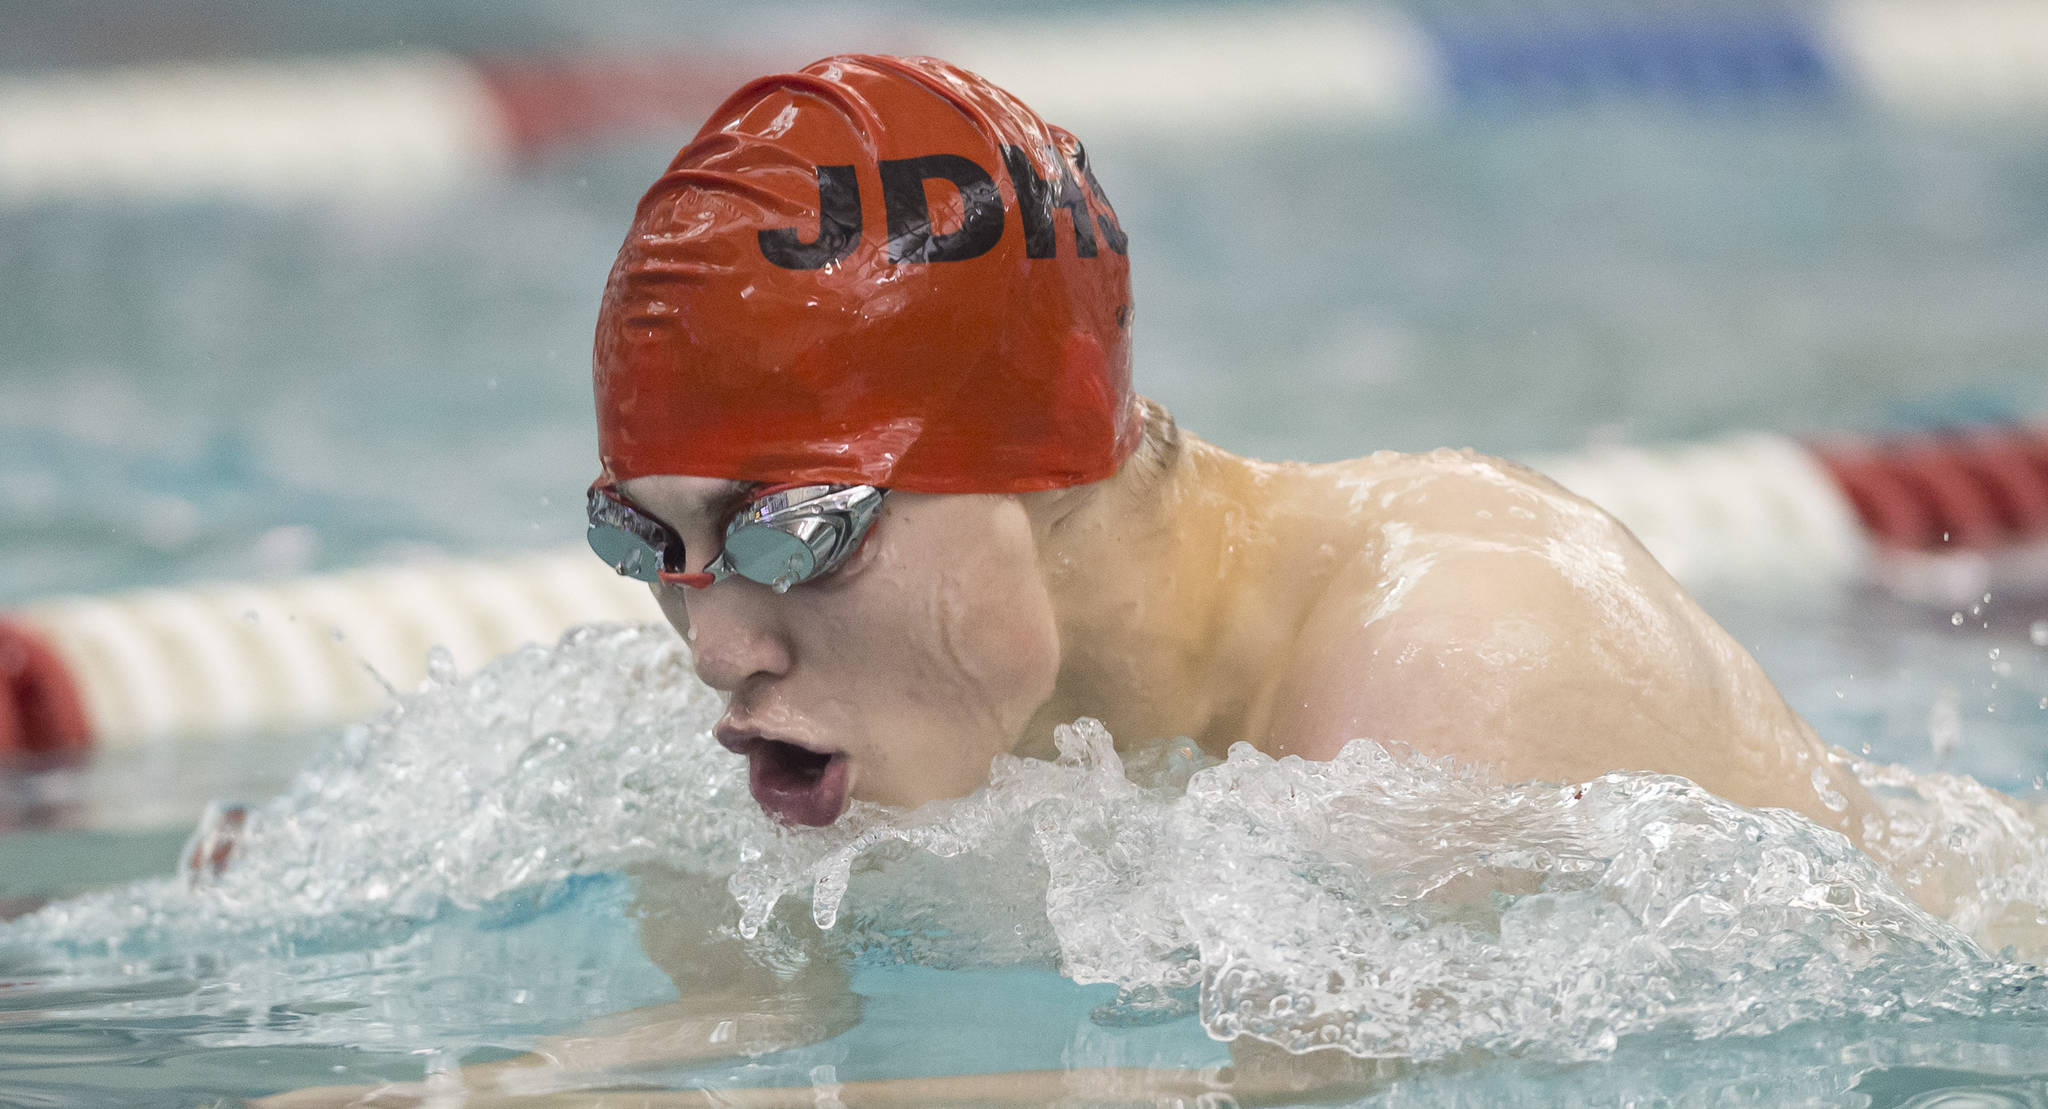 Juneau-Douglas’ Tyler Weldon competes in the Boys 200 Yard IM during the Juneau Invitational at Thunder Mountain High School on Friday, Sept. 28, 2018. (Michael Penn | Juneau Empire)